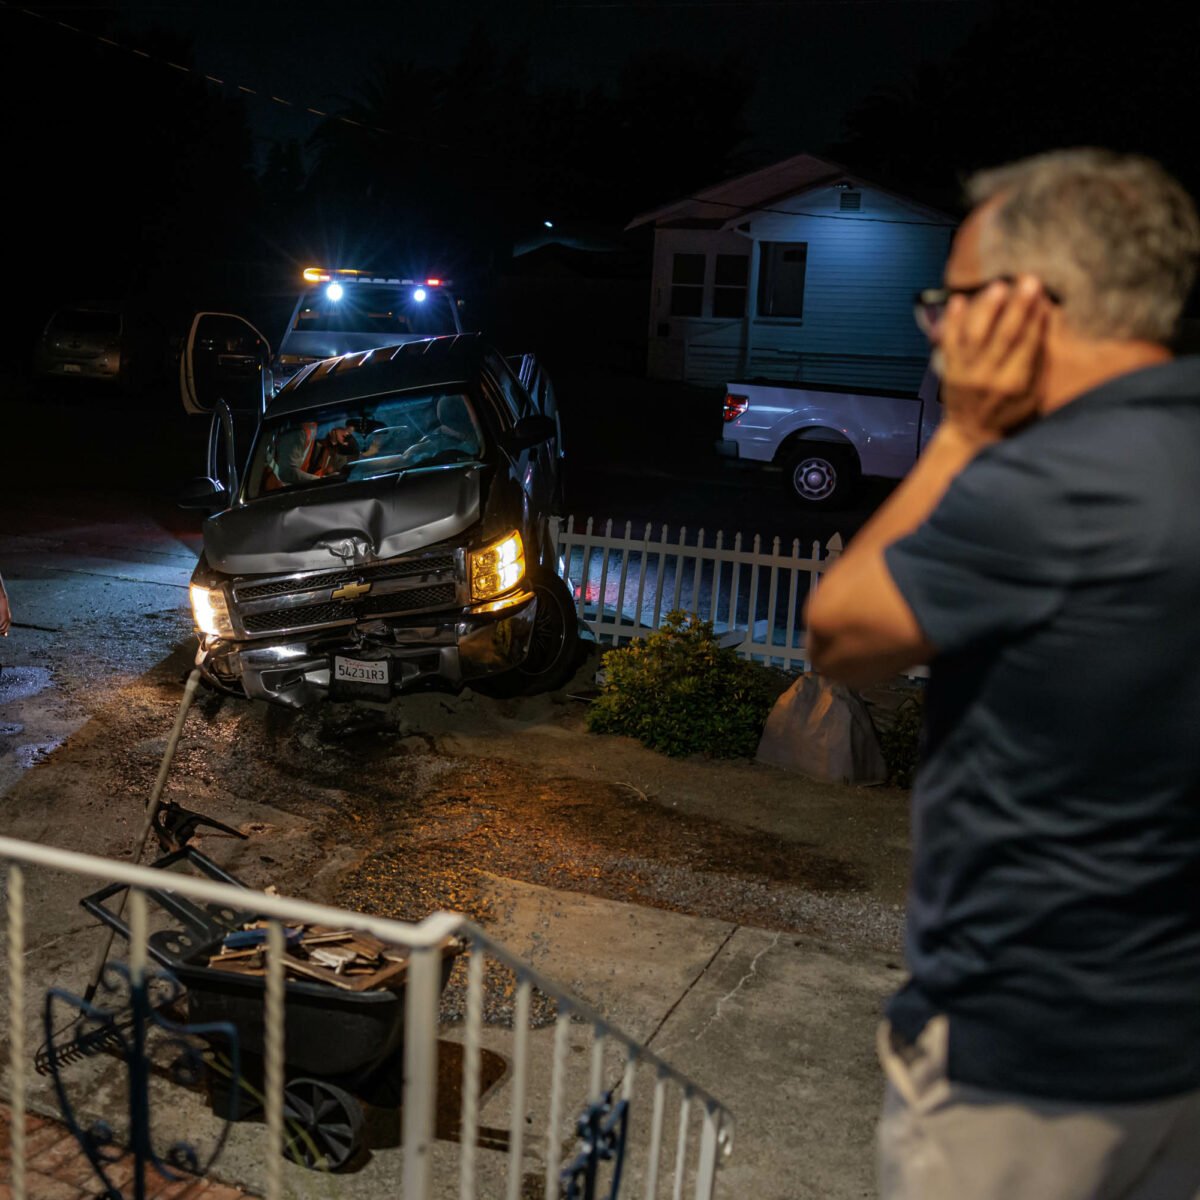 In pictures: Truck crashes into yard, damaging house on Springs Road